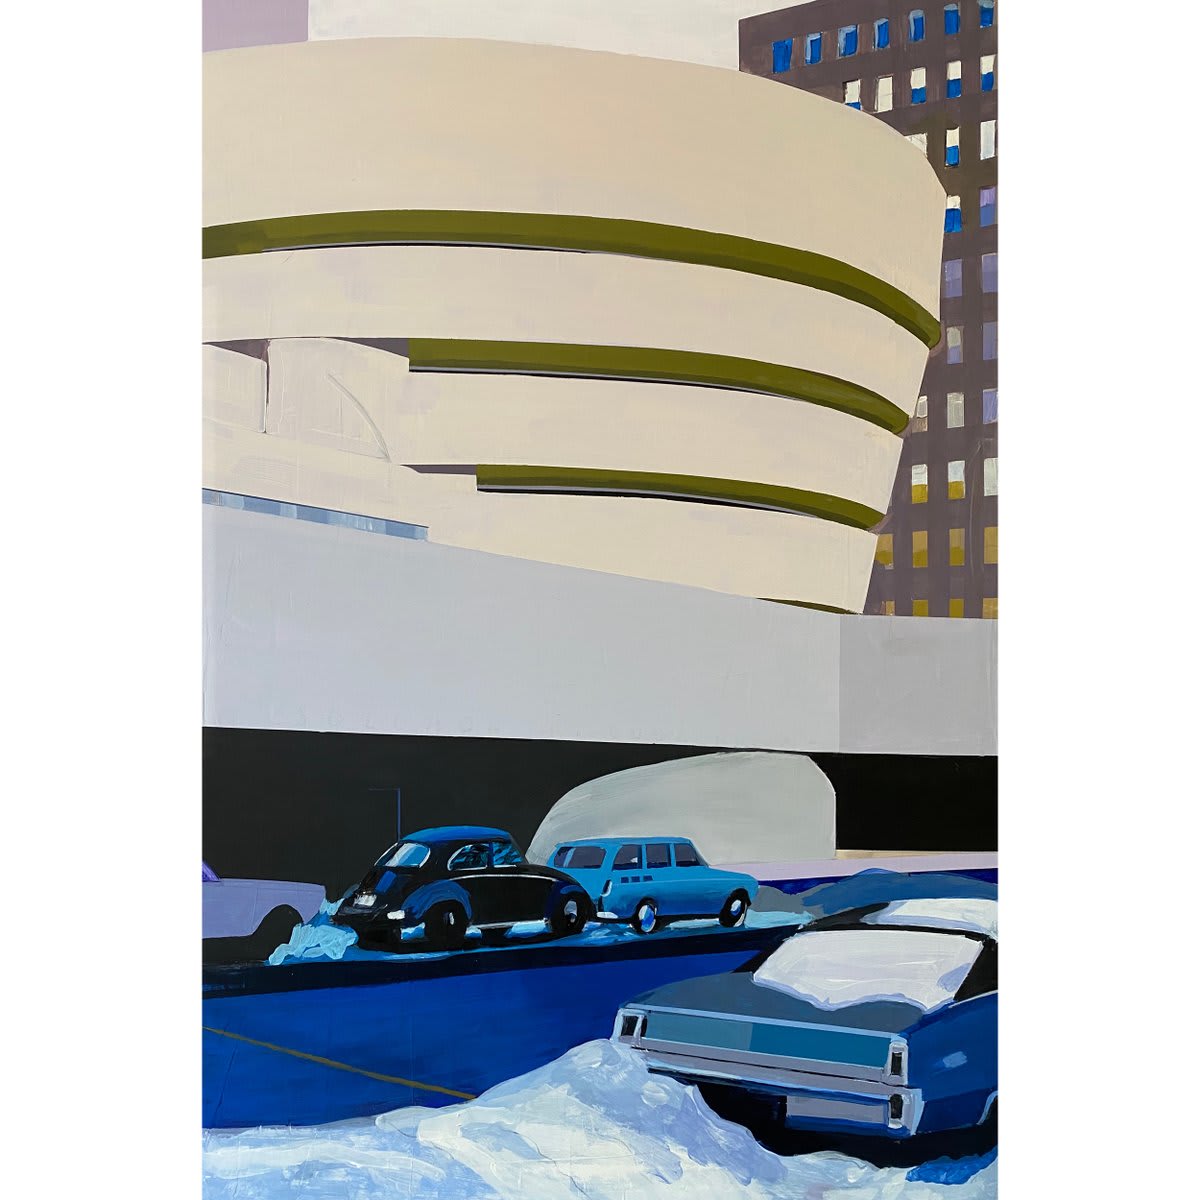 Today's FrankLloydWrightFridays illustration is by @jbrilli—"I've always loved the Guggenheim's architecture, and when I came across a vintage 35mm slide of this scene, I knew immediately that I wanted to paint it."